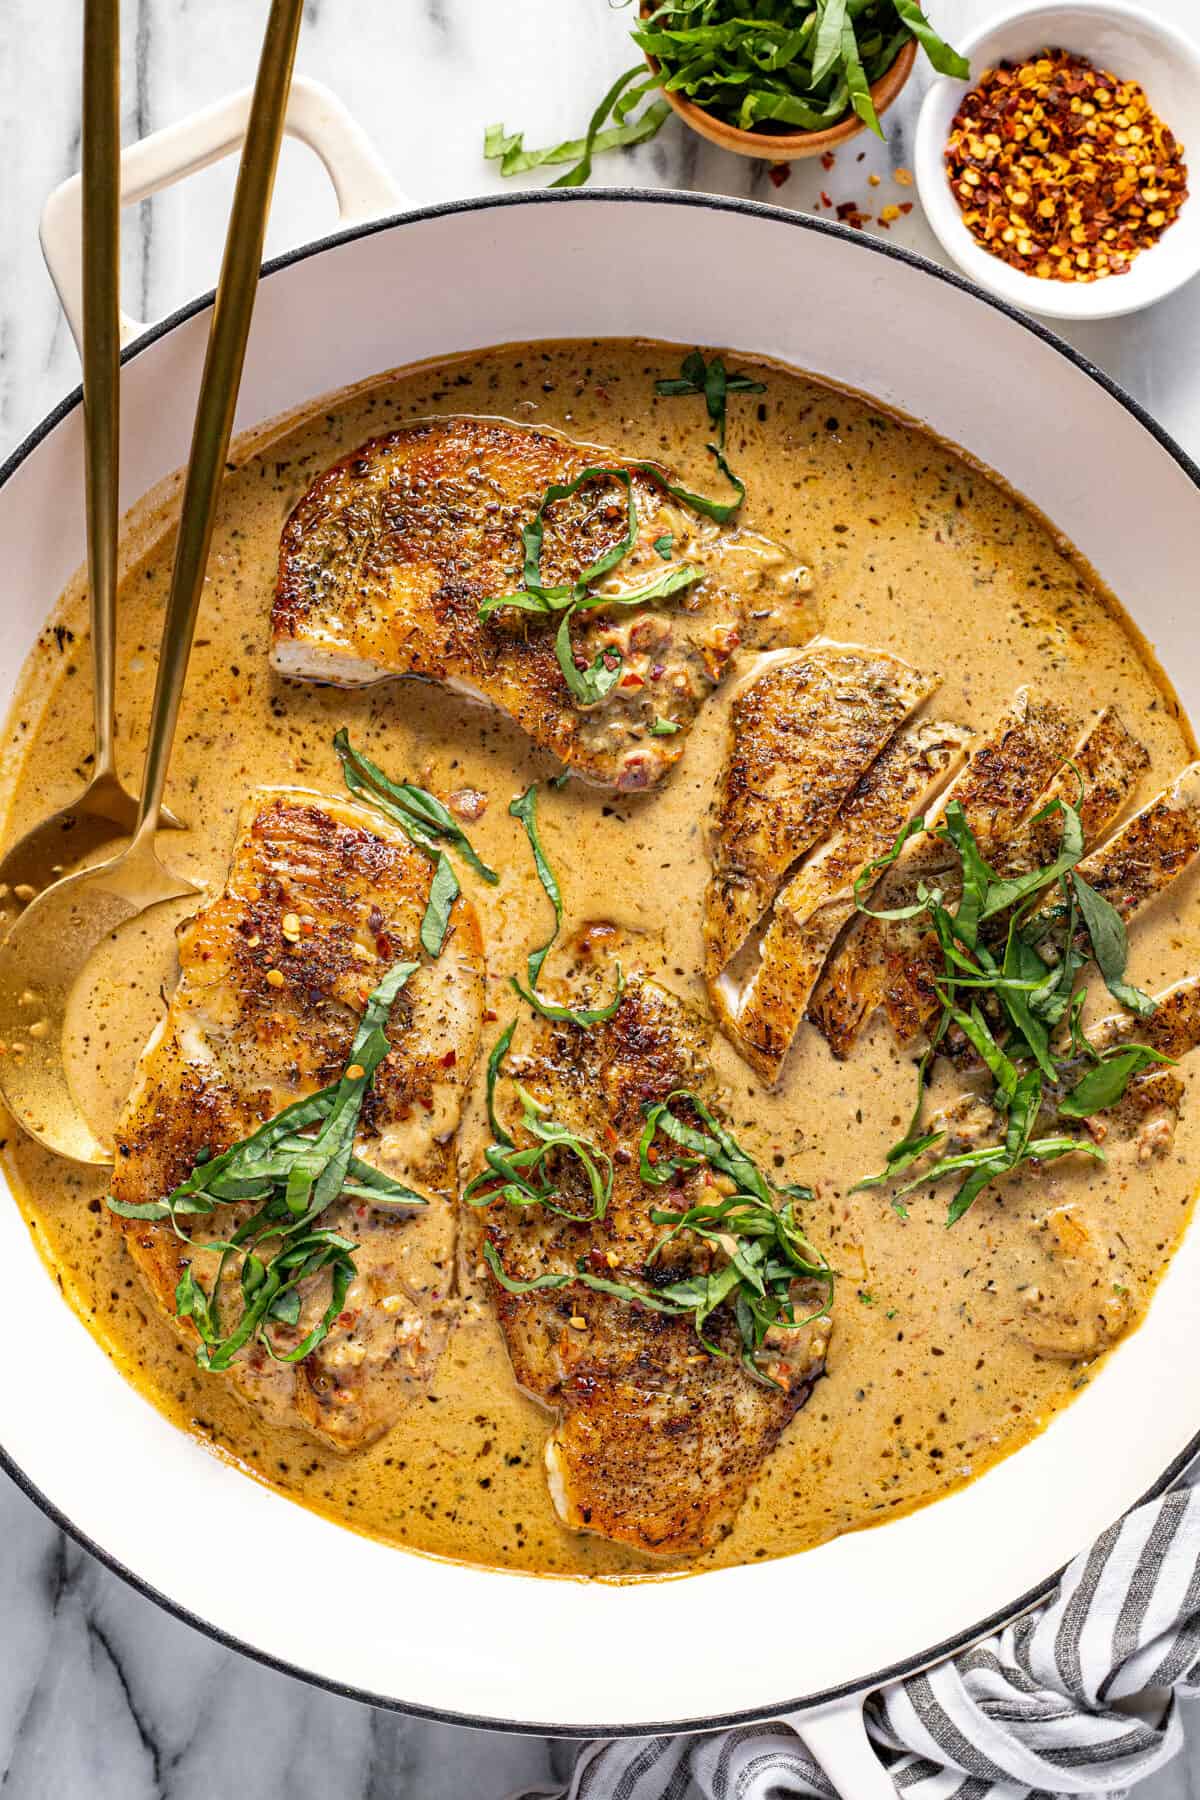 Large white pan filled with sauteed chicken and creamy sauce.